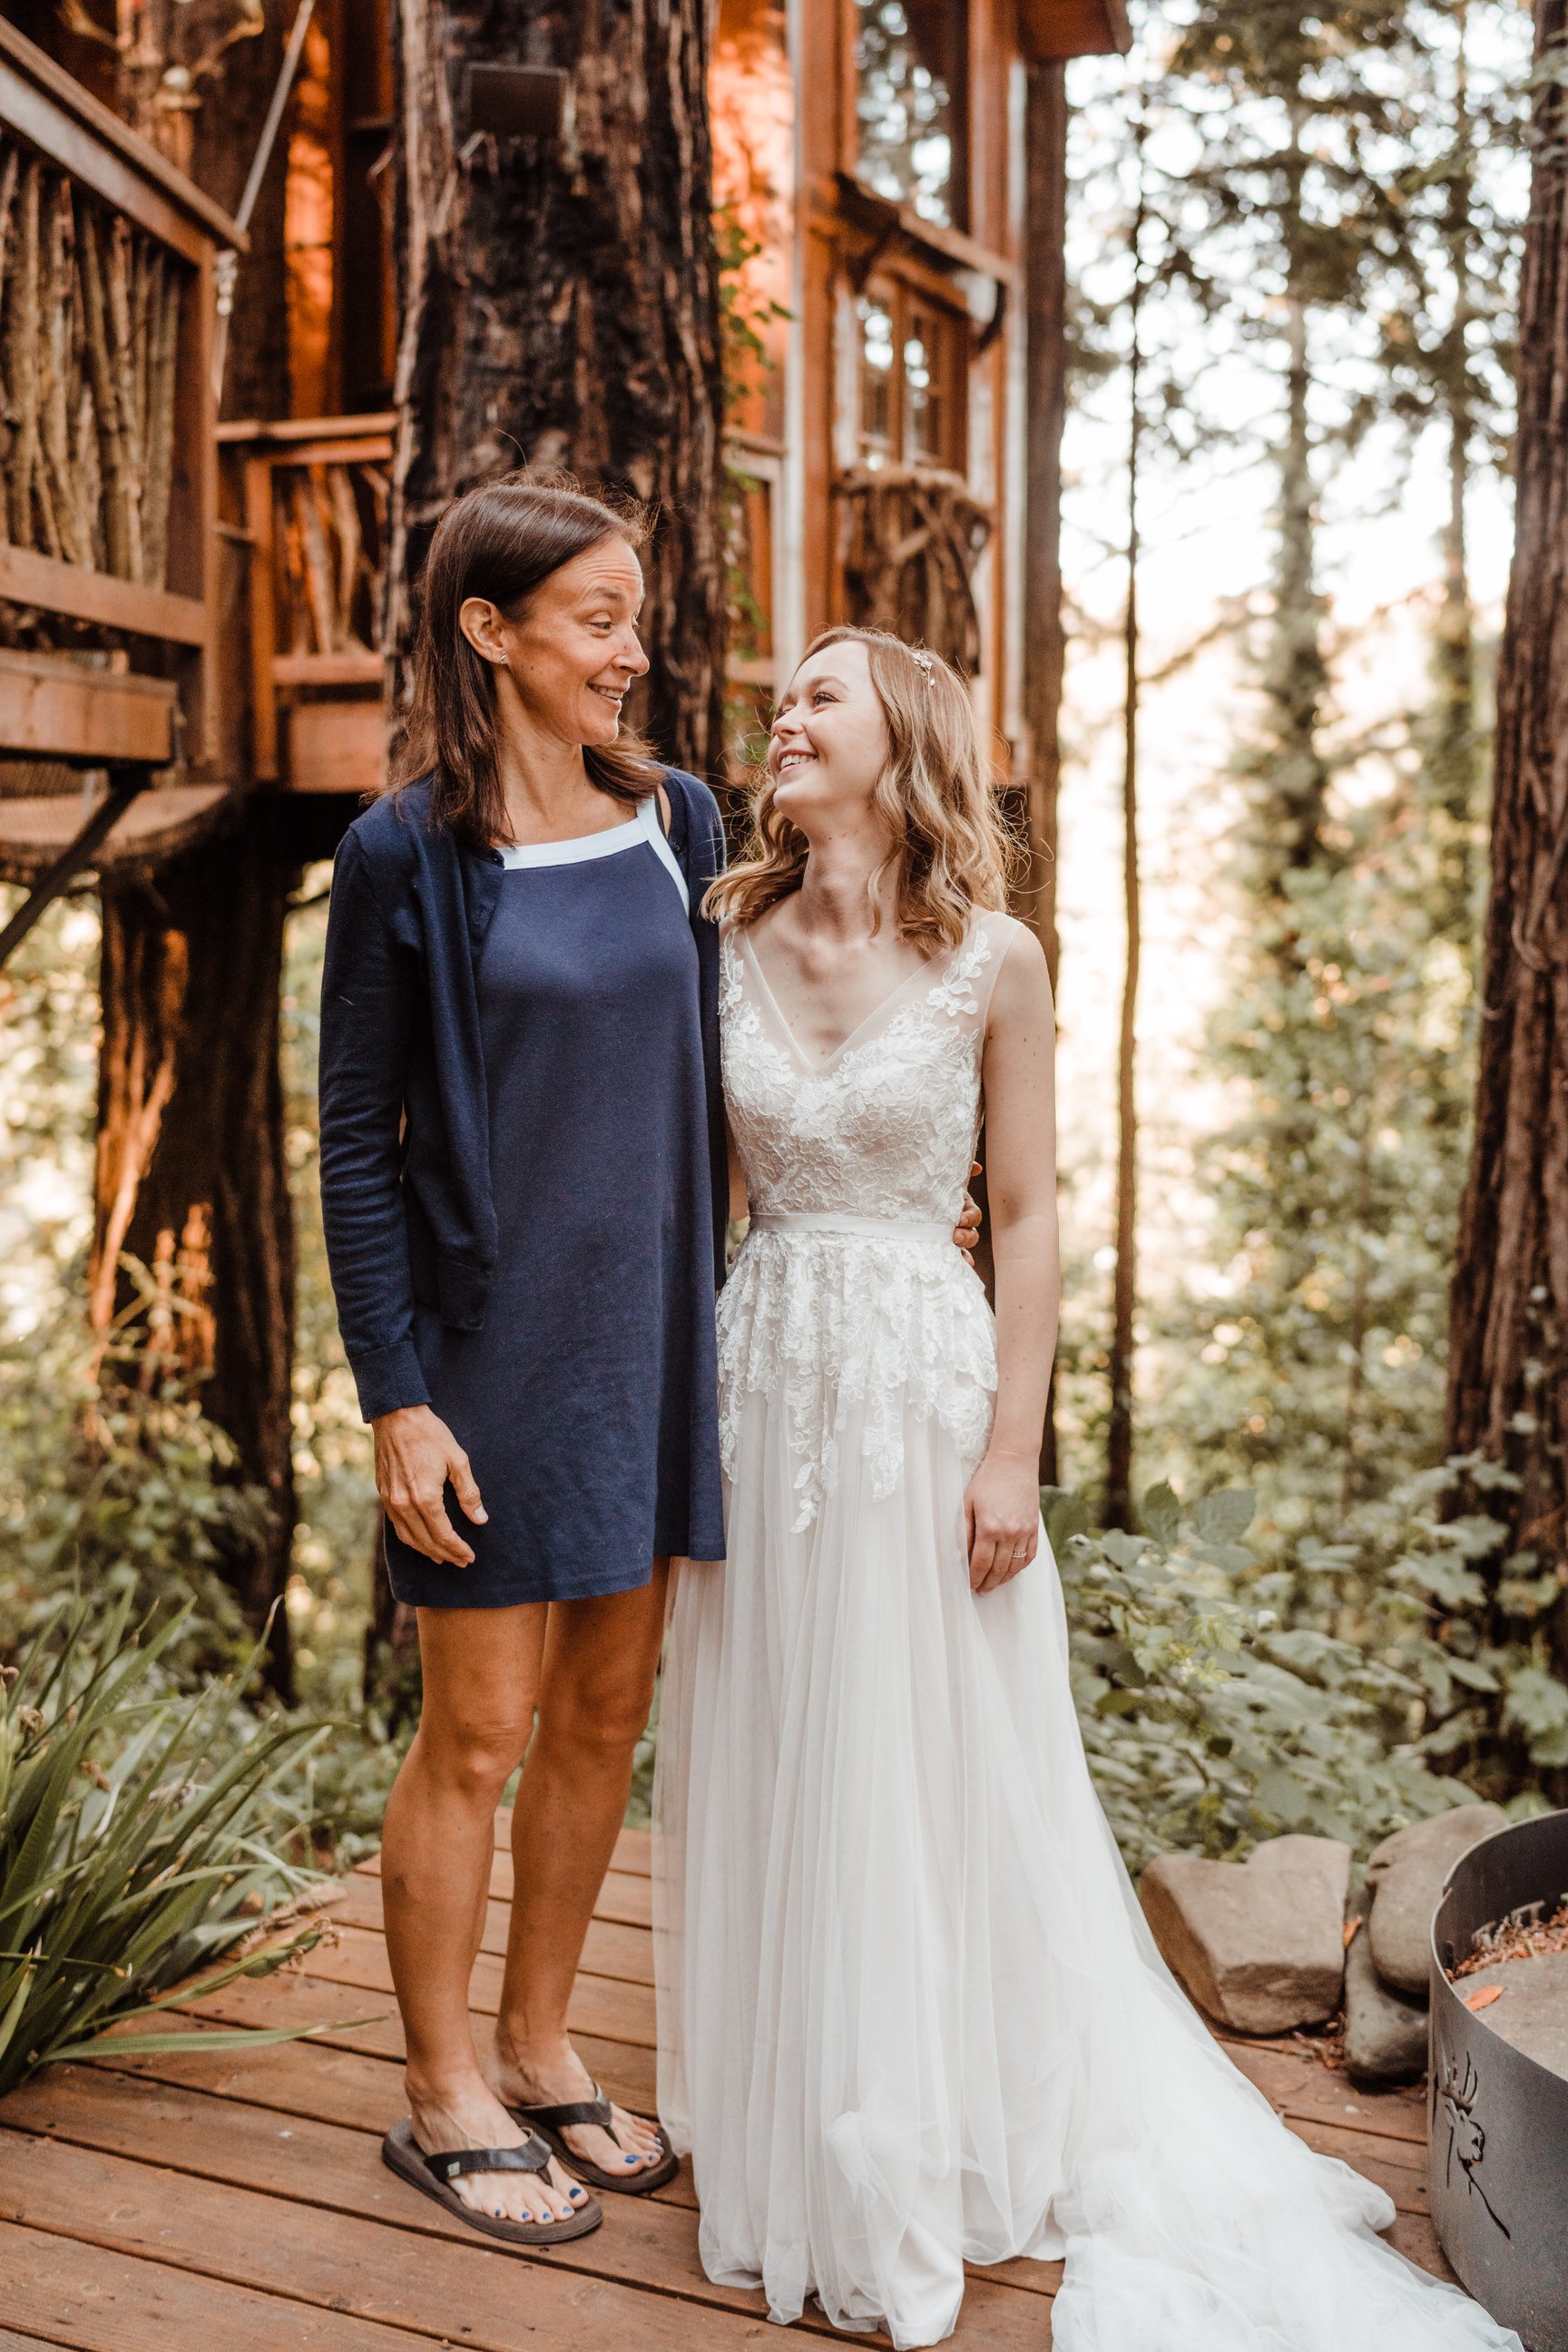 Wedding-in-the-Woods-Bride-with-best-Friend-after-elopement-ceremony (2).jpg